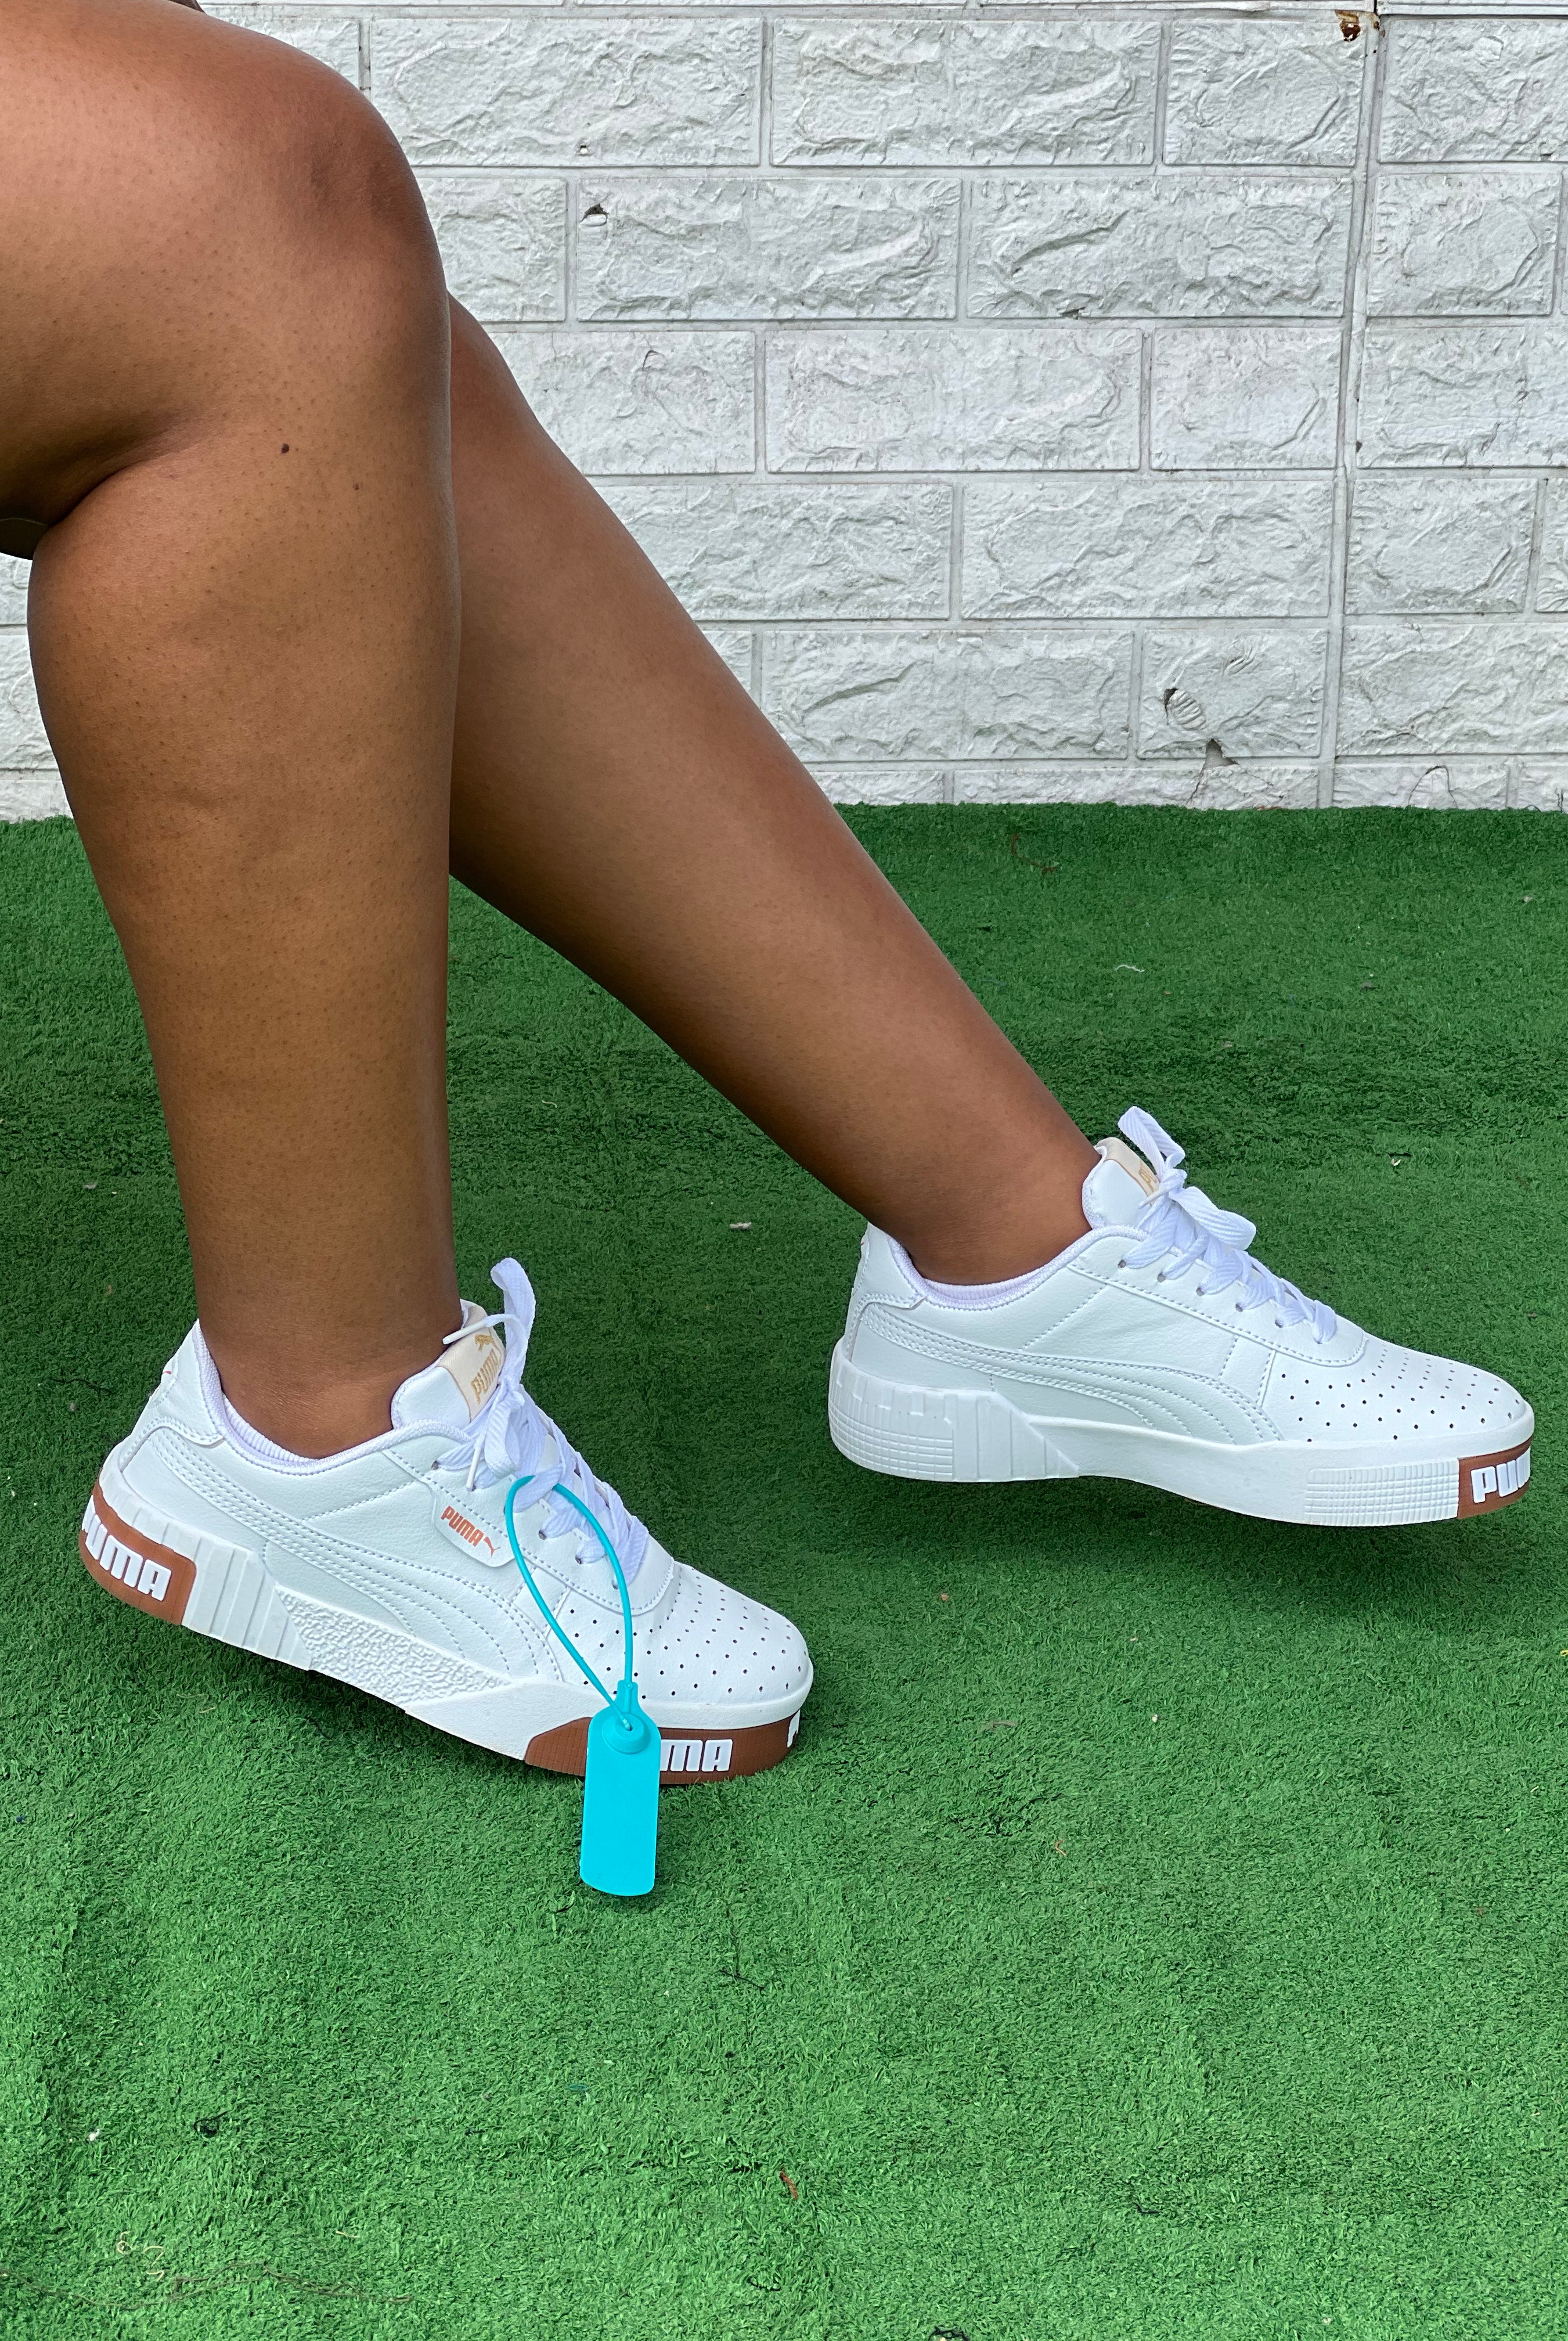 Puma White With Brown Sneaker - Shop Kenya - Affordable Fashion Puma White With Brown Sneaker hiiii_style accessories Sneakers puma-white-with-brown-sneaker continue selling when out of stock Shop Kenya - Affordable Fashion